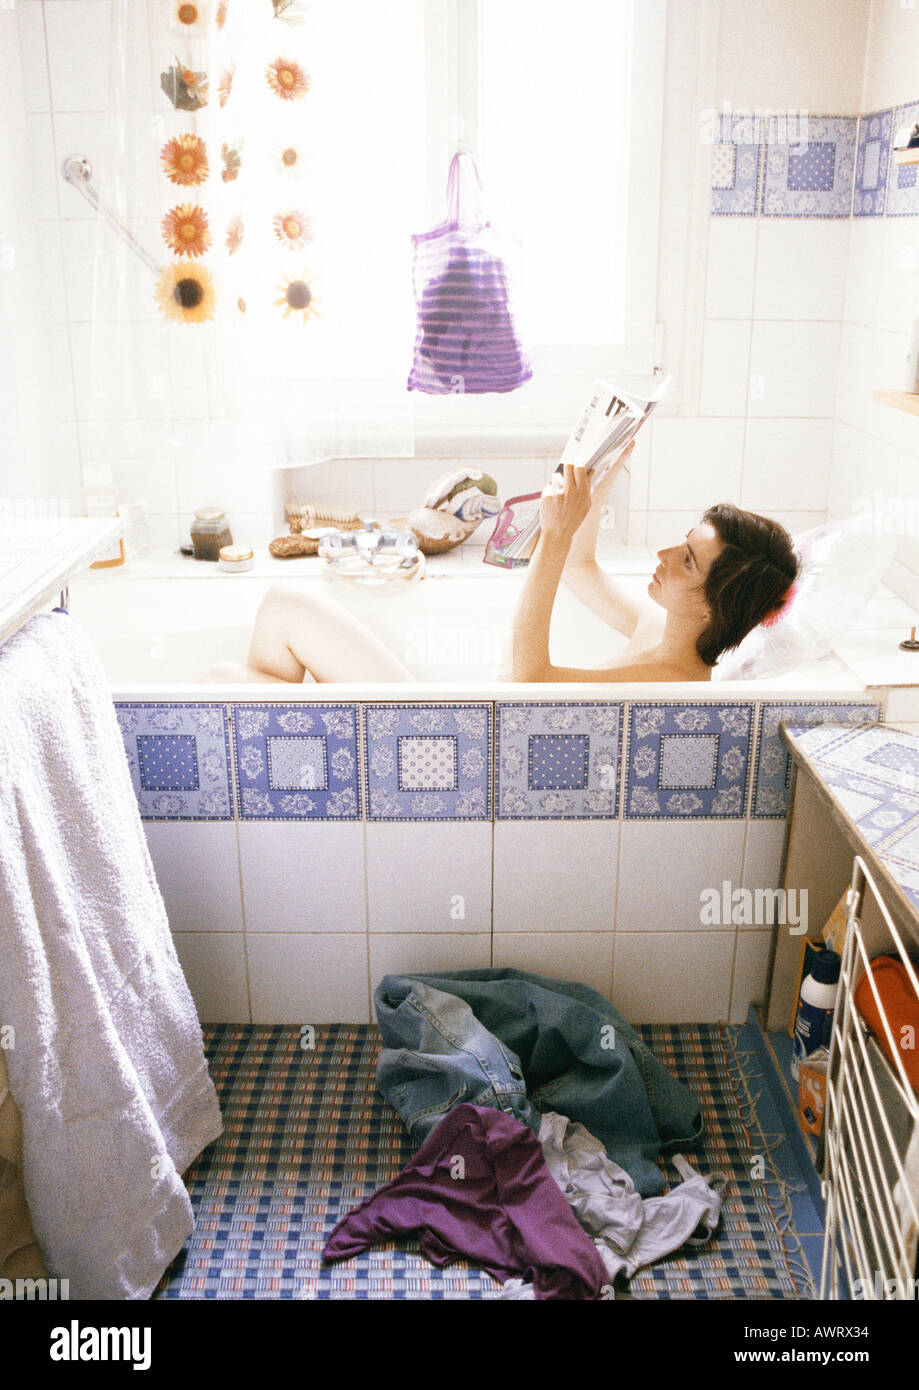 Young woman reading in bathtub Stock Photo